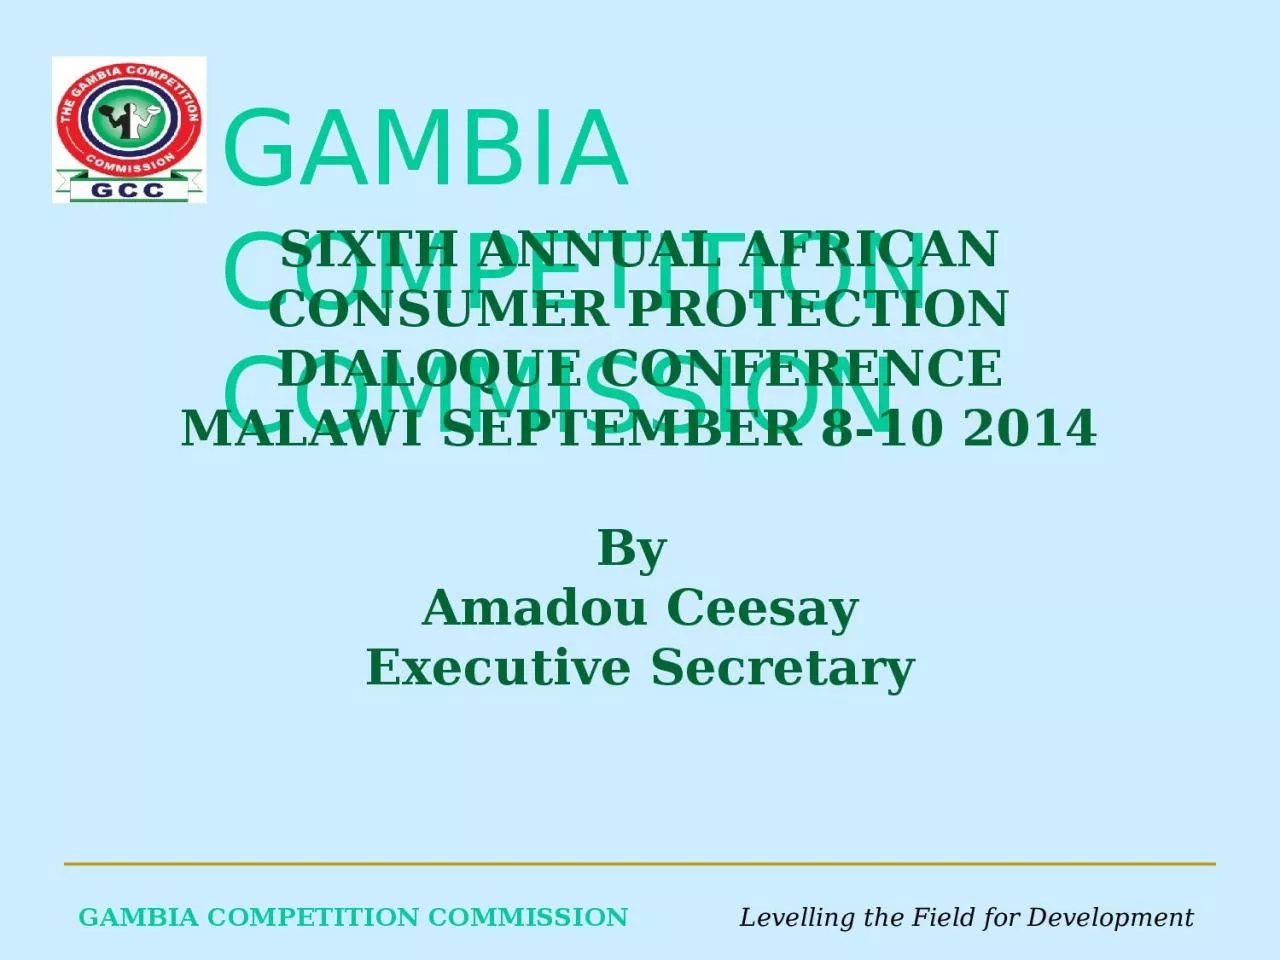 GAMBIA COMPETITION COMMISSION